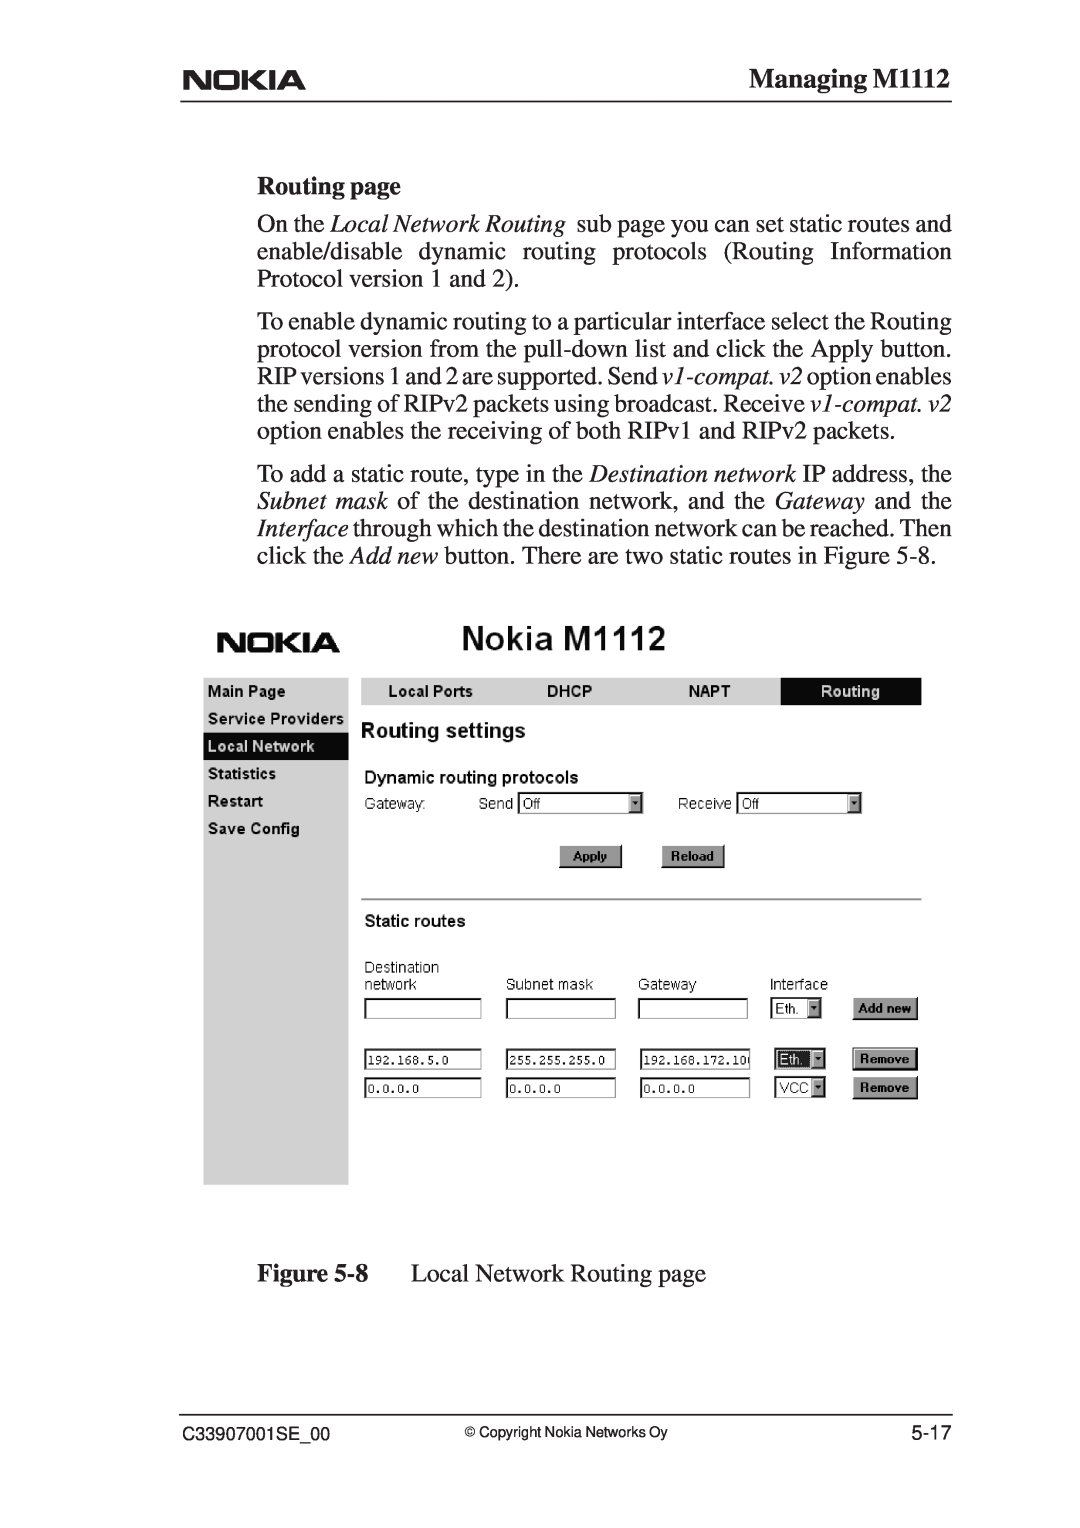 Nokia manual Managing M1112, 8 Local Network Routing page 